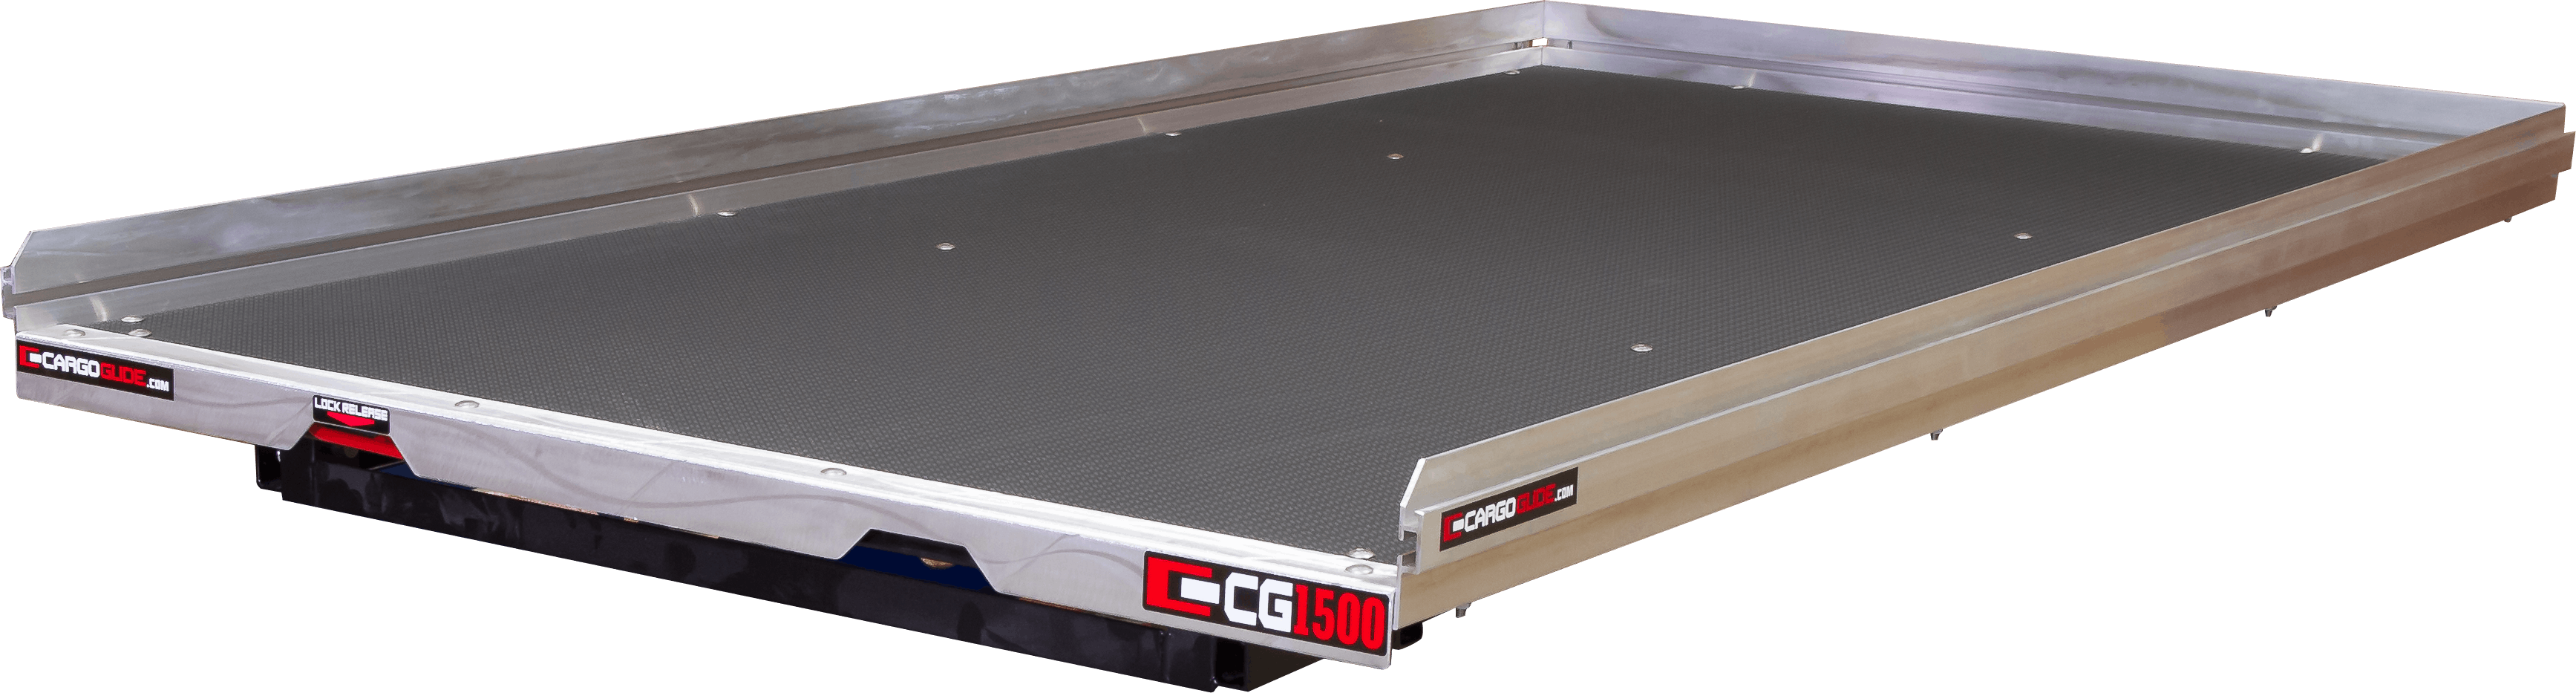 DECKED CG1500-6348 Slide Out Cargo Tray, 1500 lb capacity, 75% ext 6 bearings, Alum Tie-Down Rails